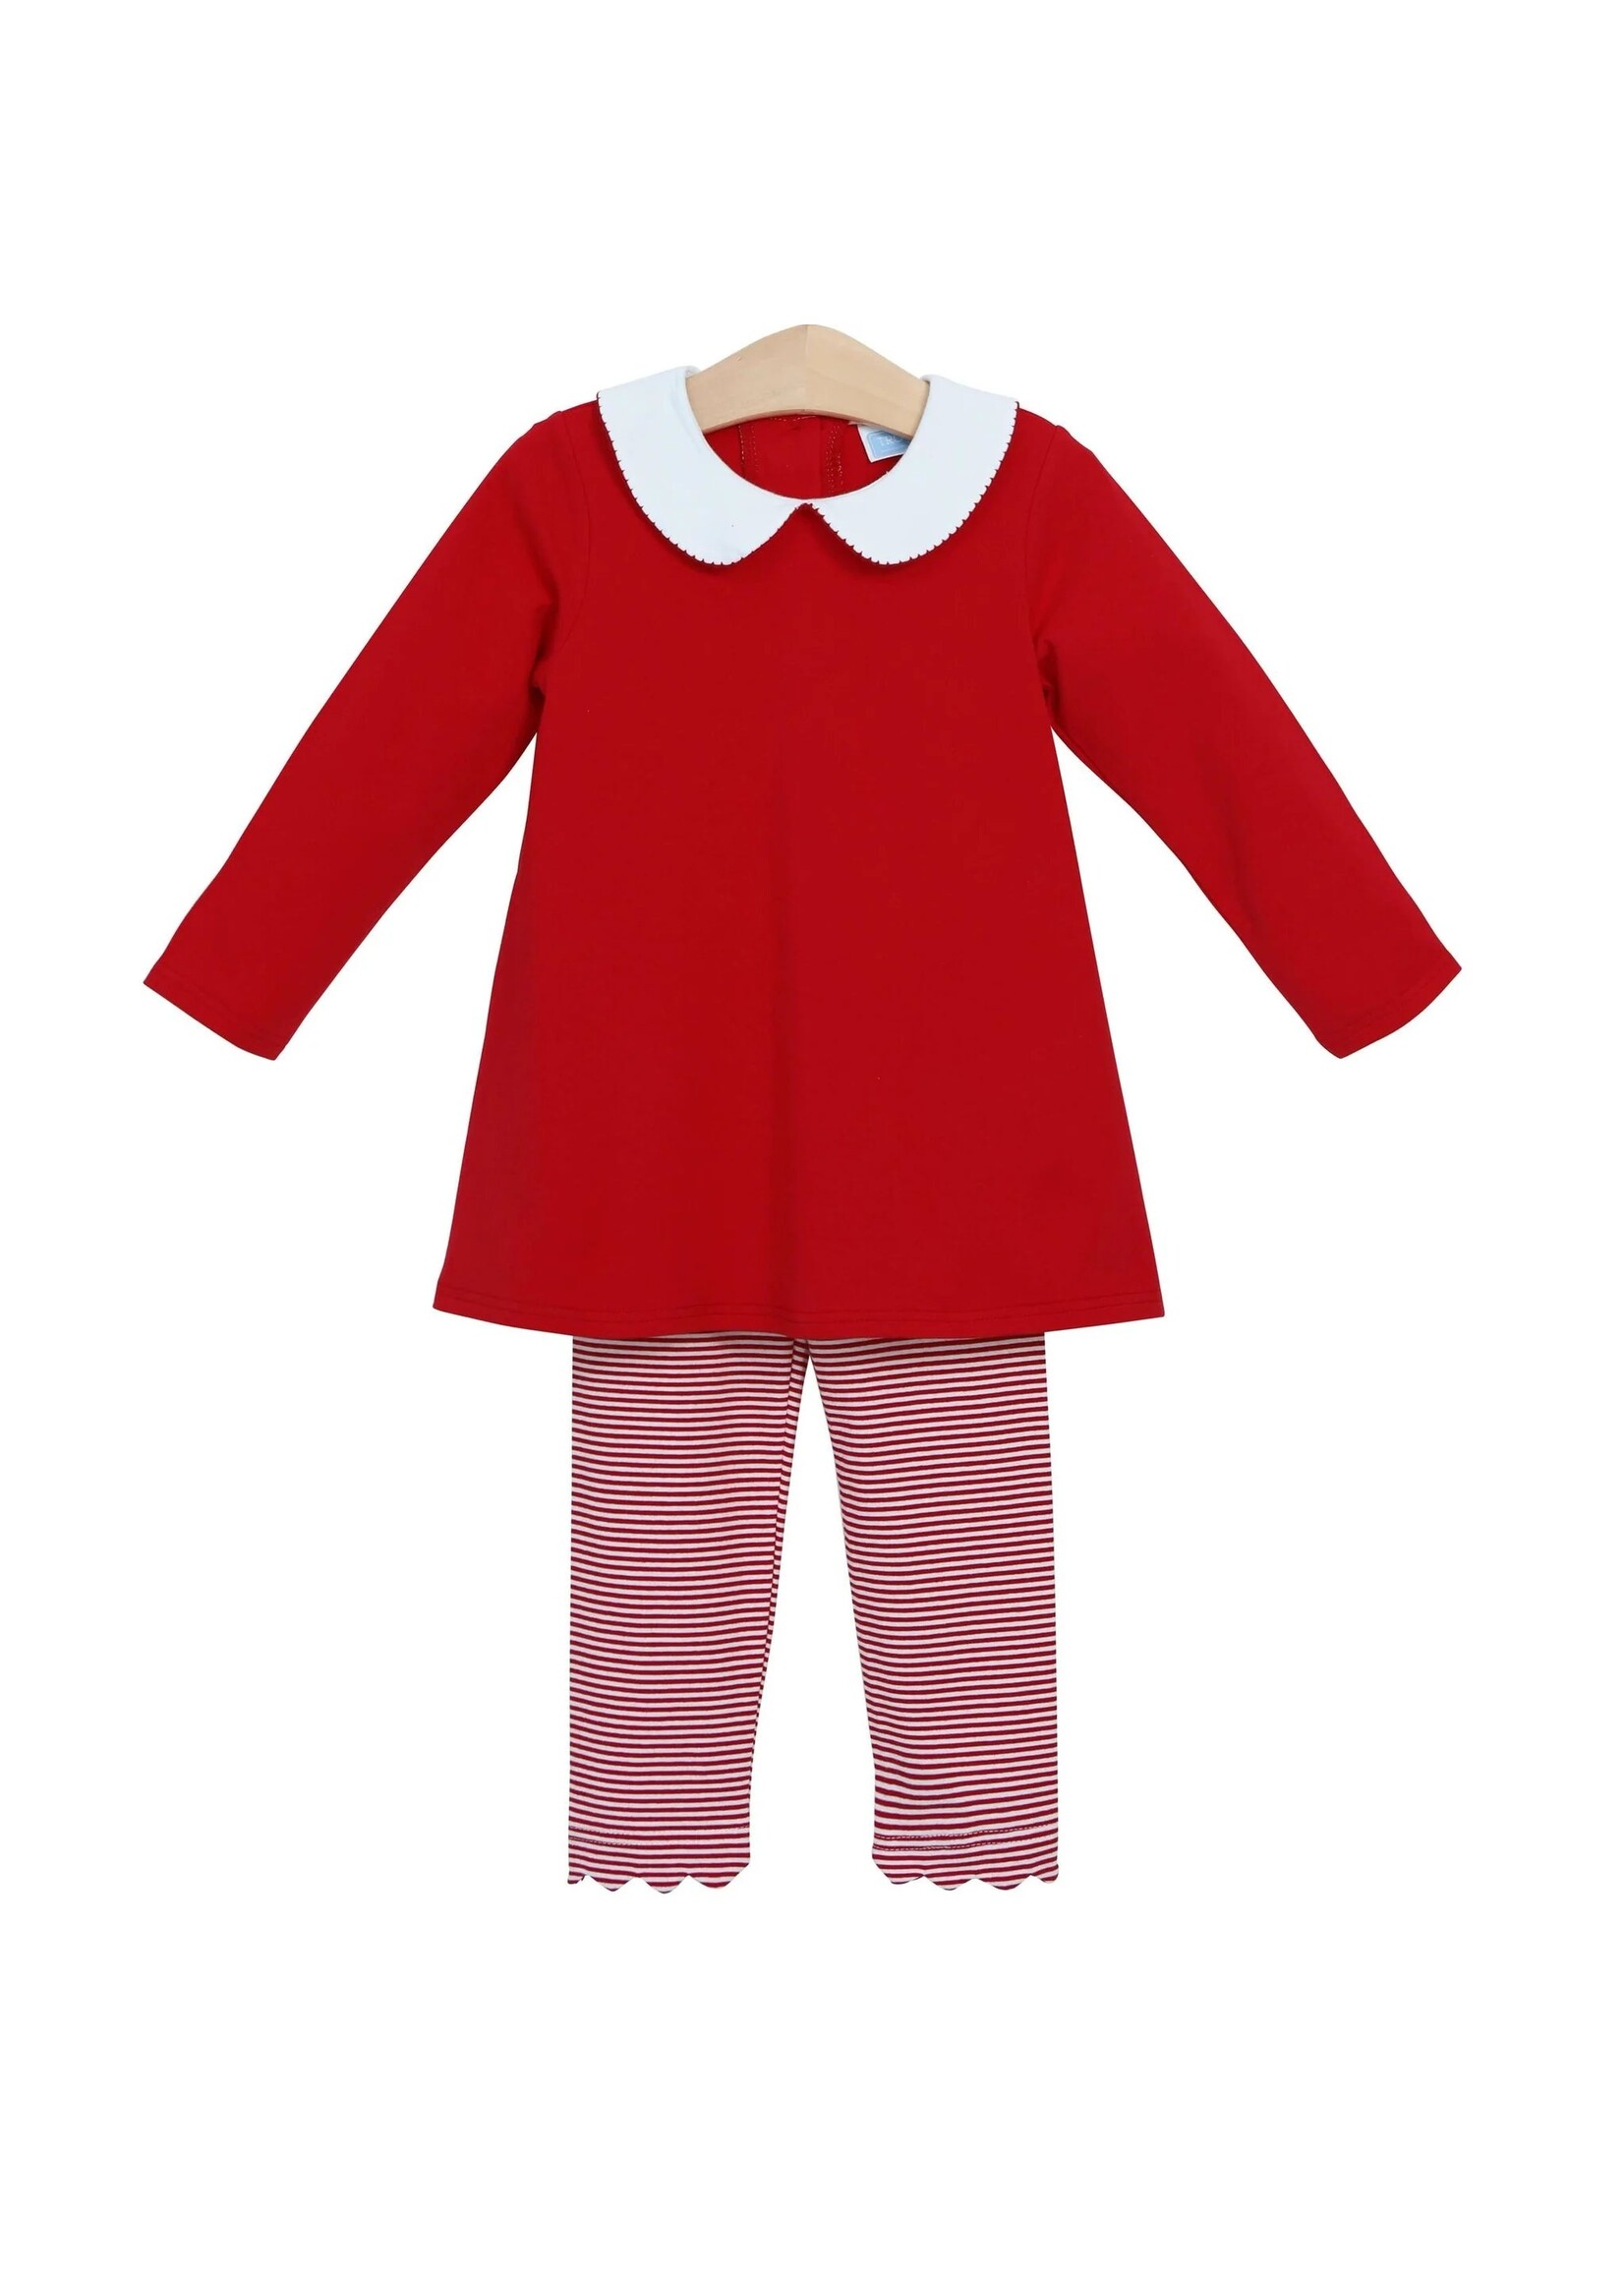 Trotter Street Kids Trotter Street Claire Red Pant Set